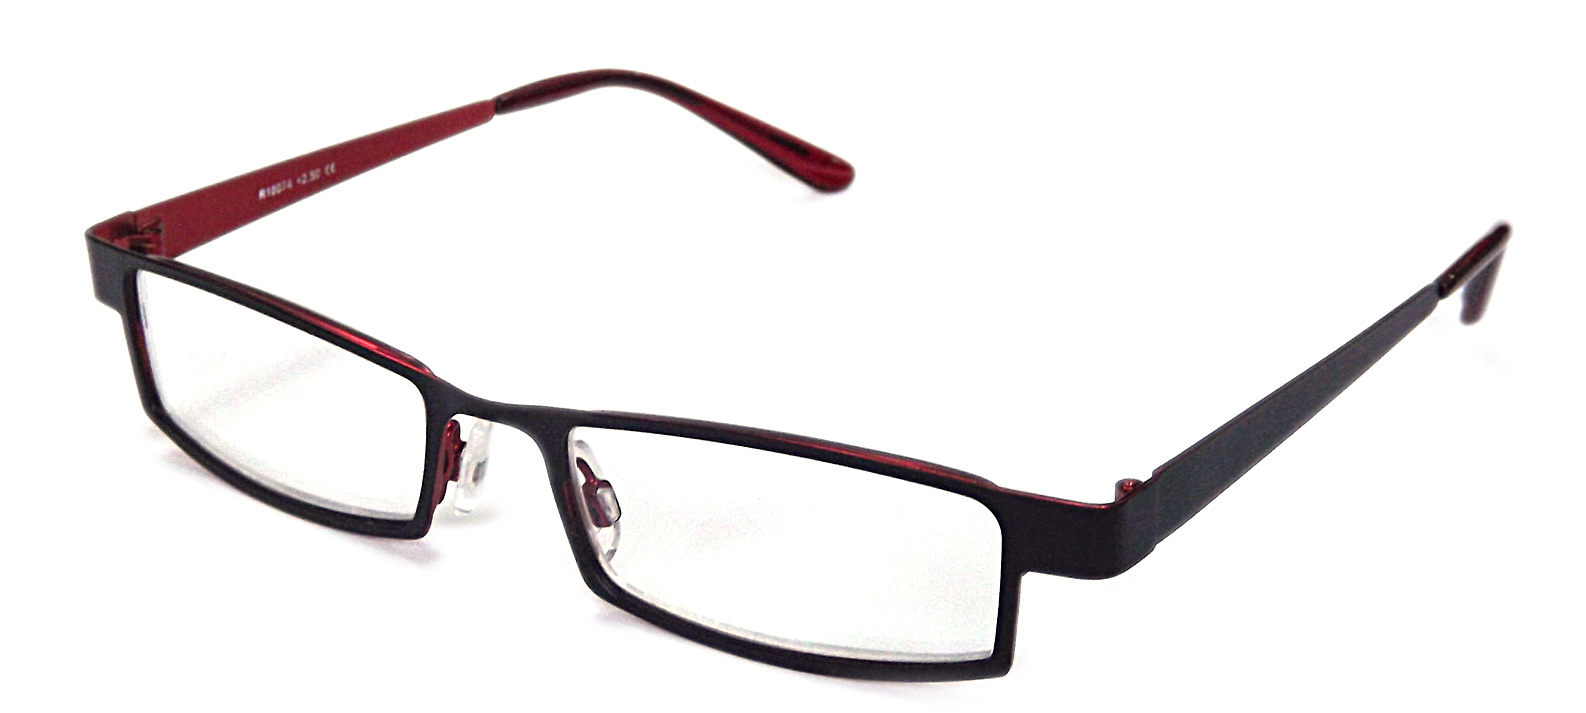 Reading Glasses at affordable prices - Reading Glasses Direct